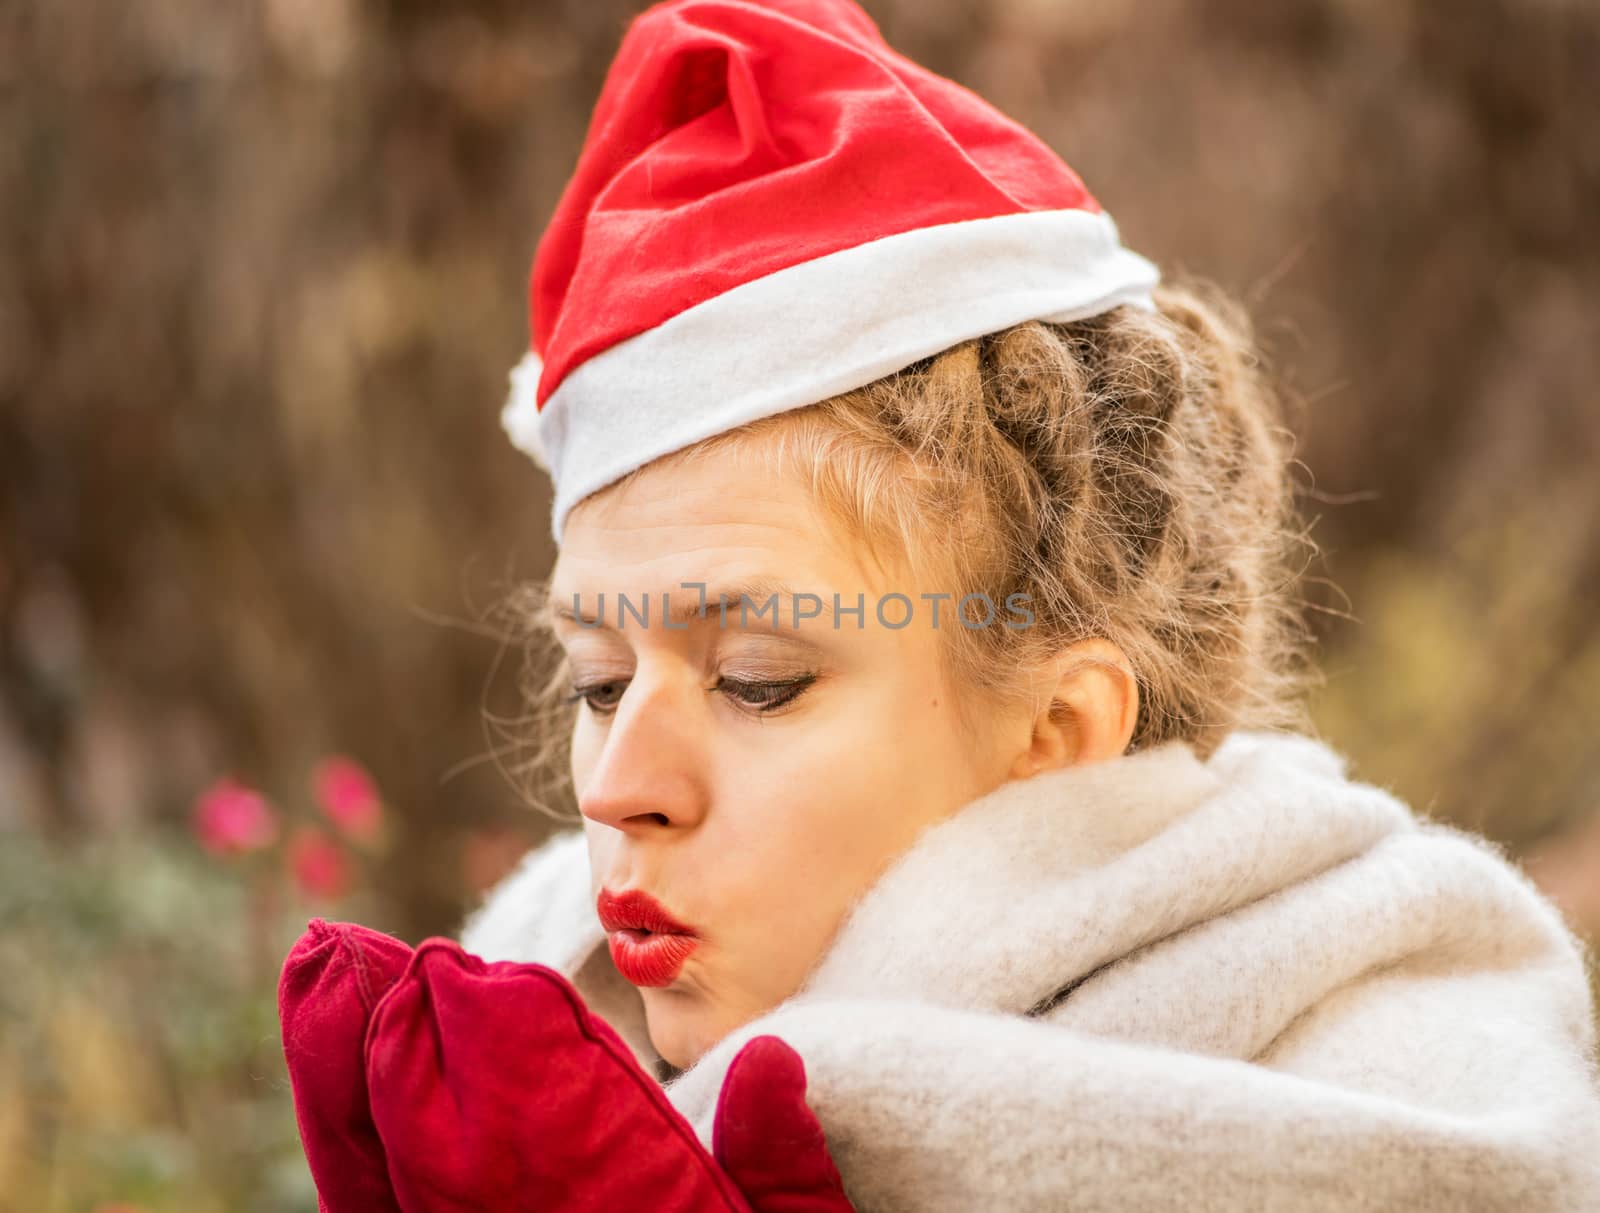 christmas concept. european woman wearing warm scarf and christmas hat is blowing on her hands